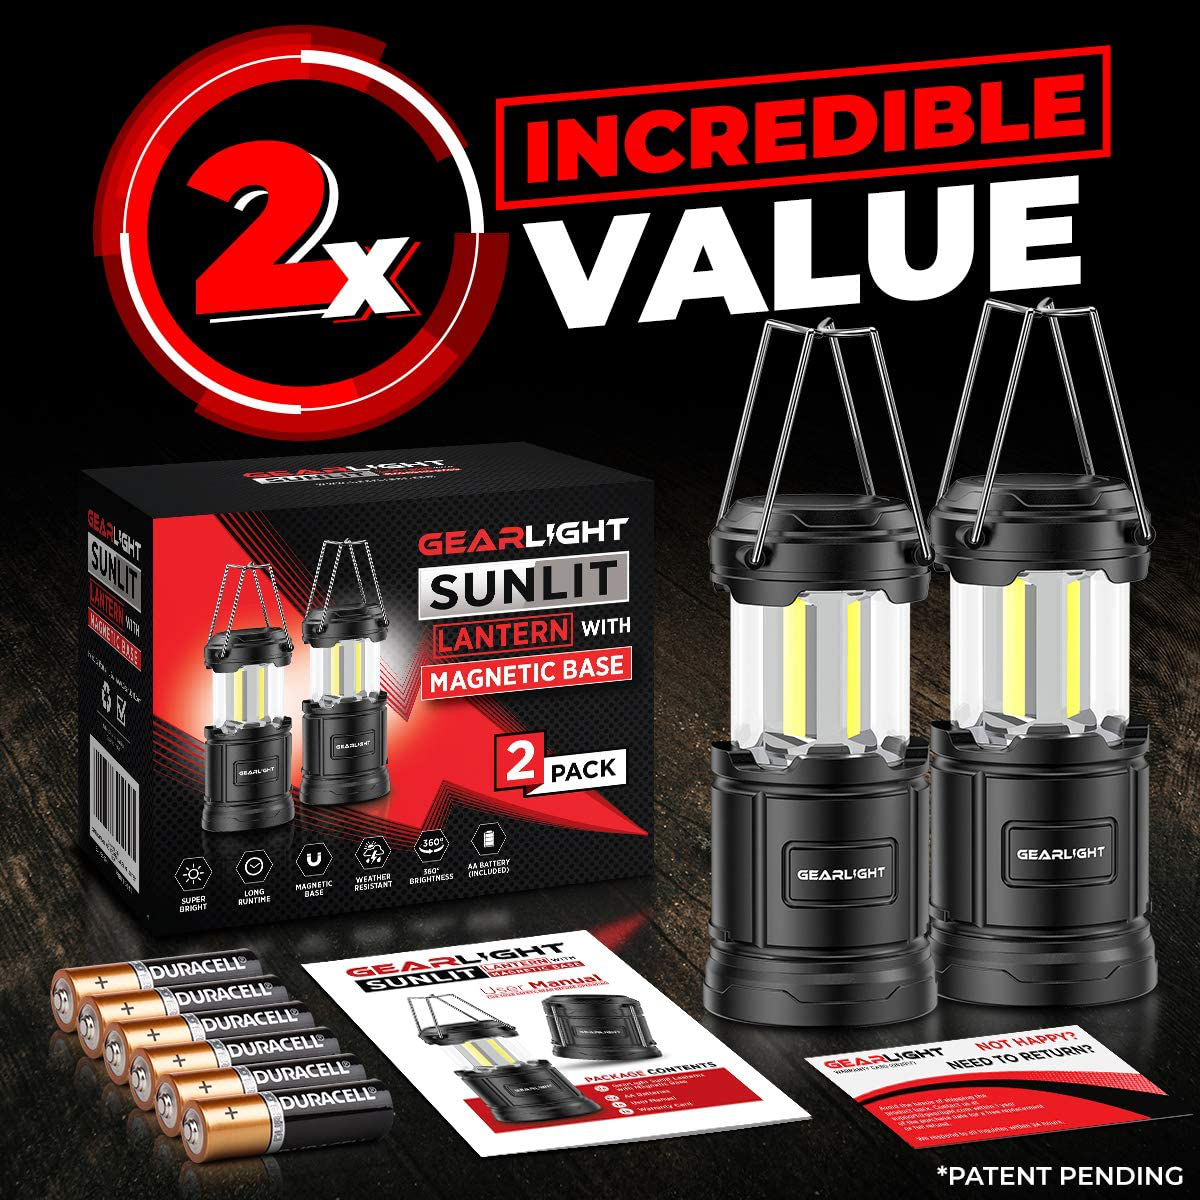 GearLight LED Camping Lantern Sunlit (2 Pack) - Battery Powered Lamp Lanterns for Emergency, Power Outages, Hurricane – Portable Camp Light, Flashlights, Accessories, Gear, Supplies